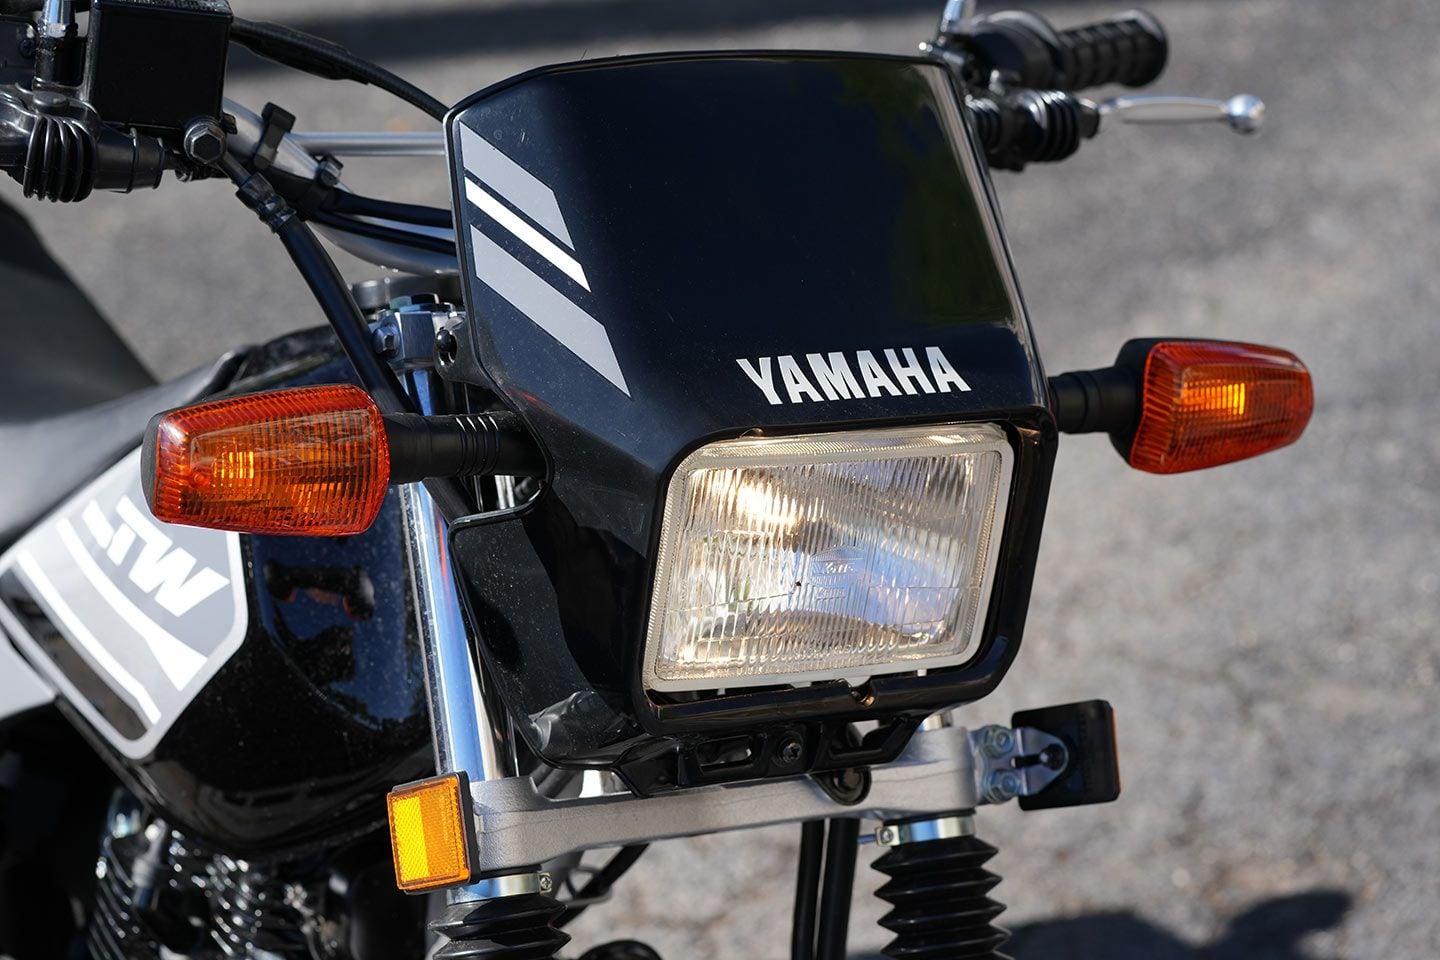 You know when you are from the ‘80s when… a rectangular halogen bulb headlight is an ode to the time when this motorcycle was originally released.